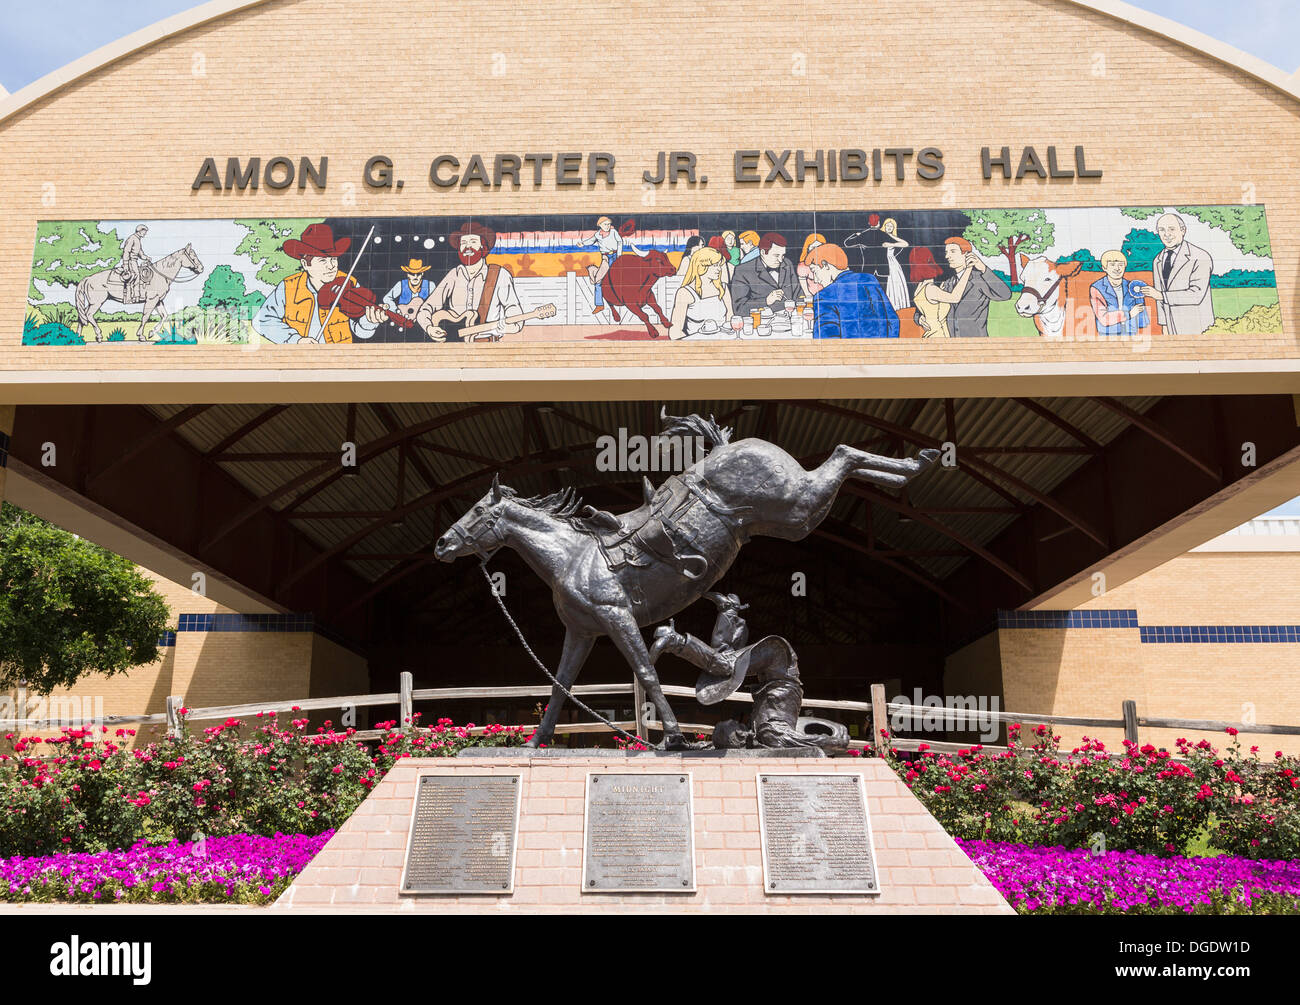 Statue outside Amon G. Carter JR. Exhibits Hall Fort Worth Texas USA Stock Photo